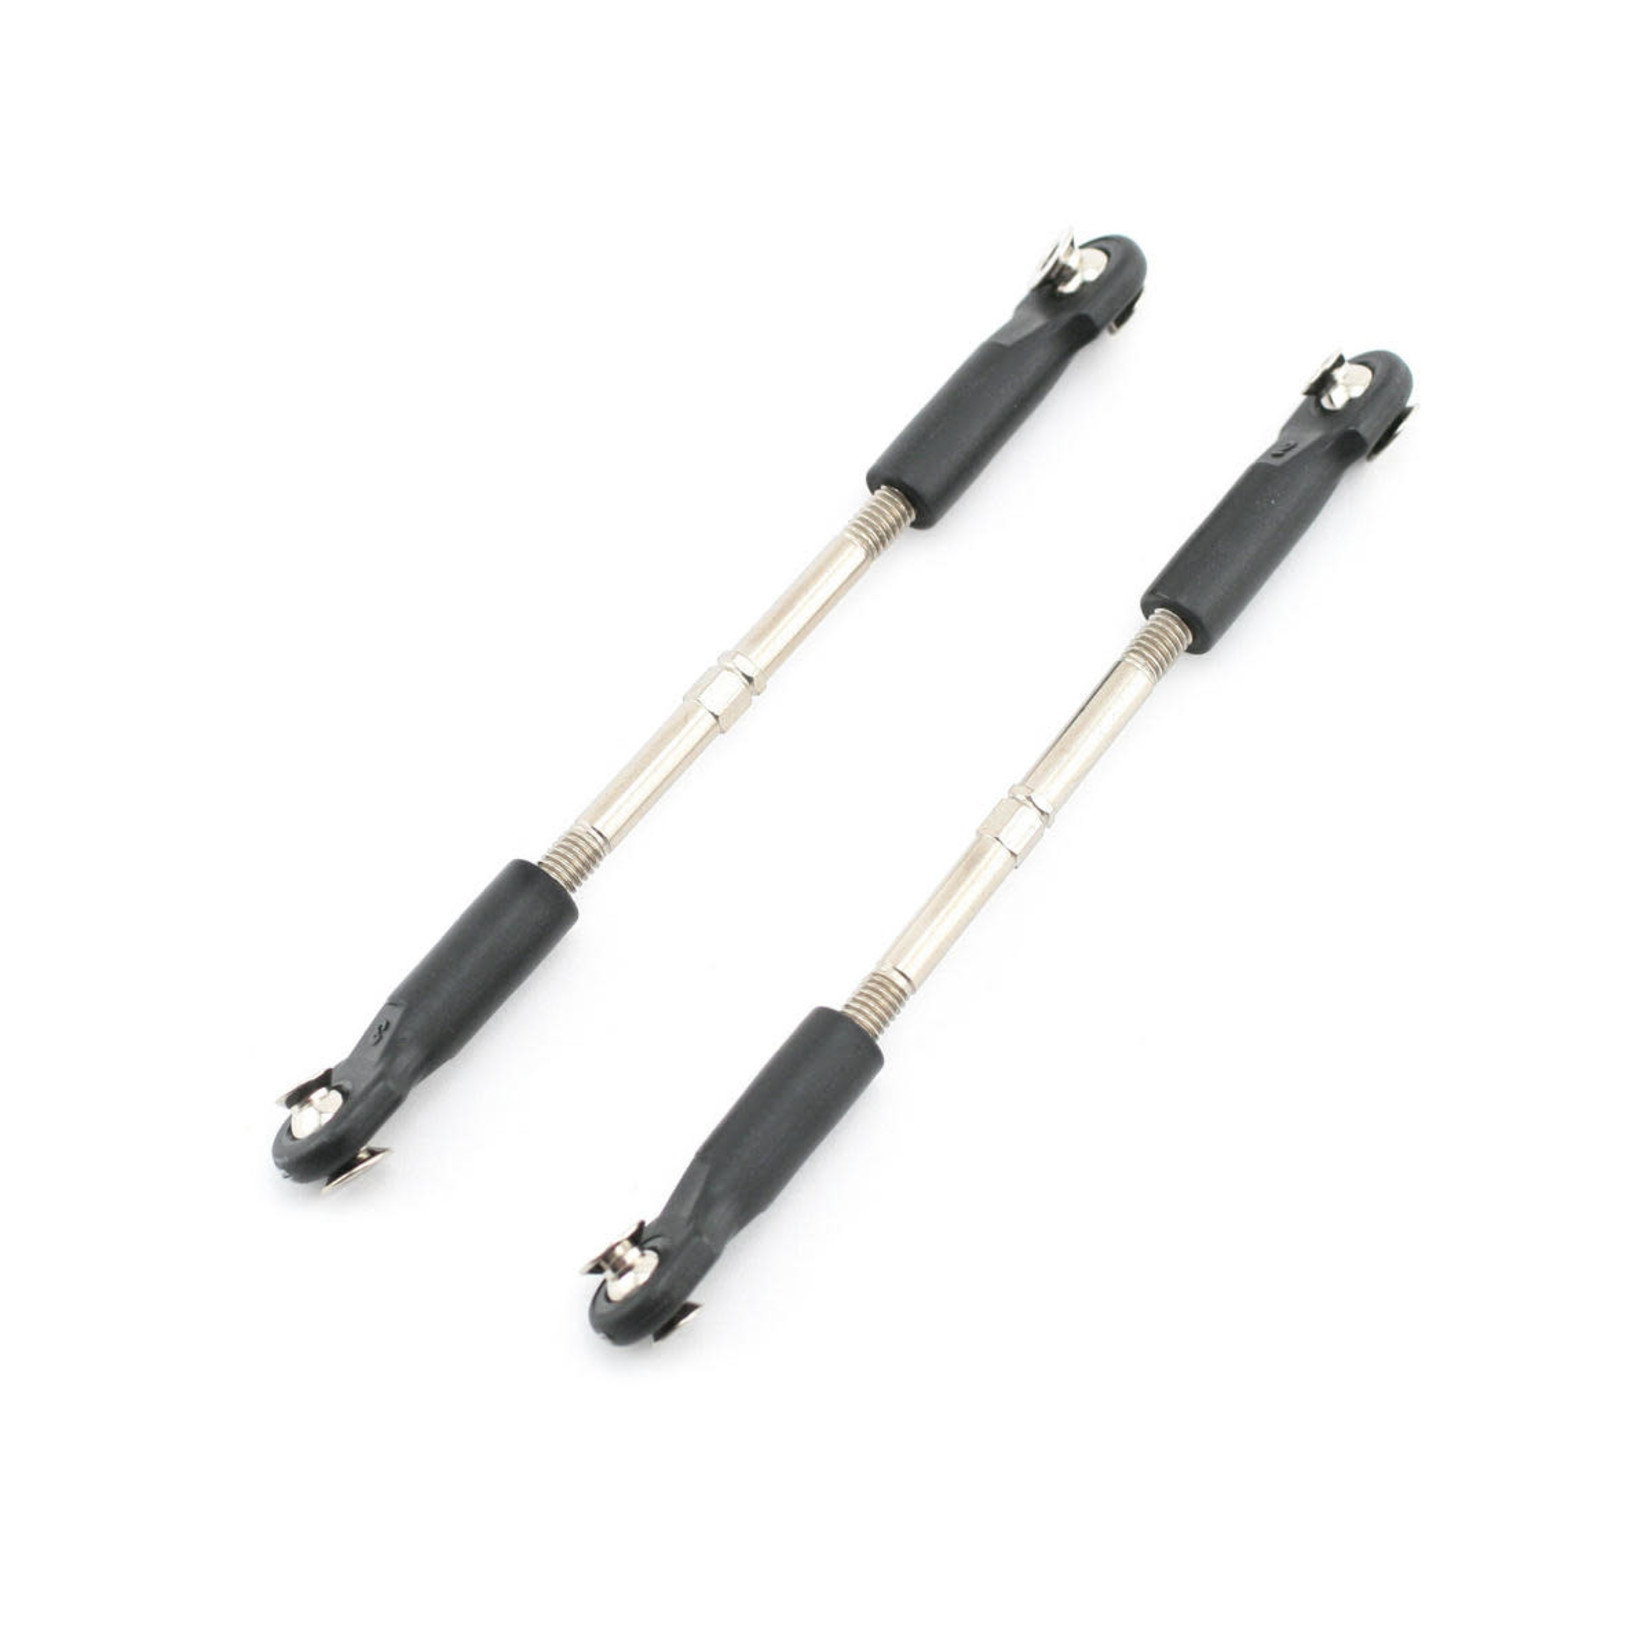 Traxxas Traxxas Stampede 55mm Toe Link Turnbuckle (2) (VXL) #3645